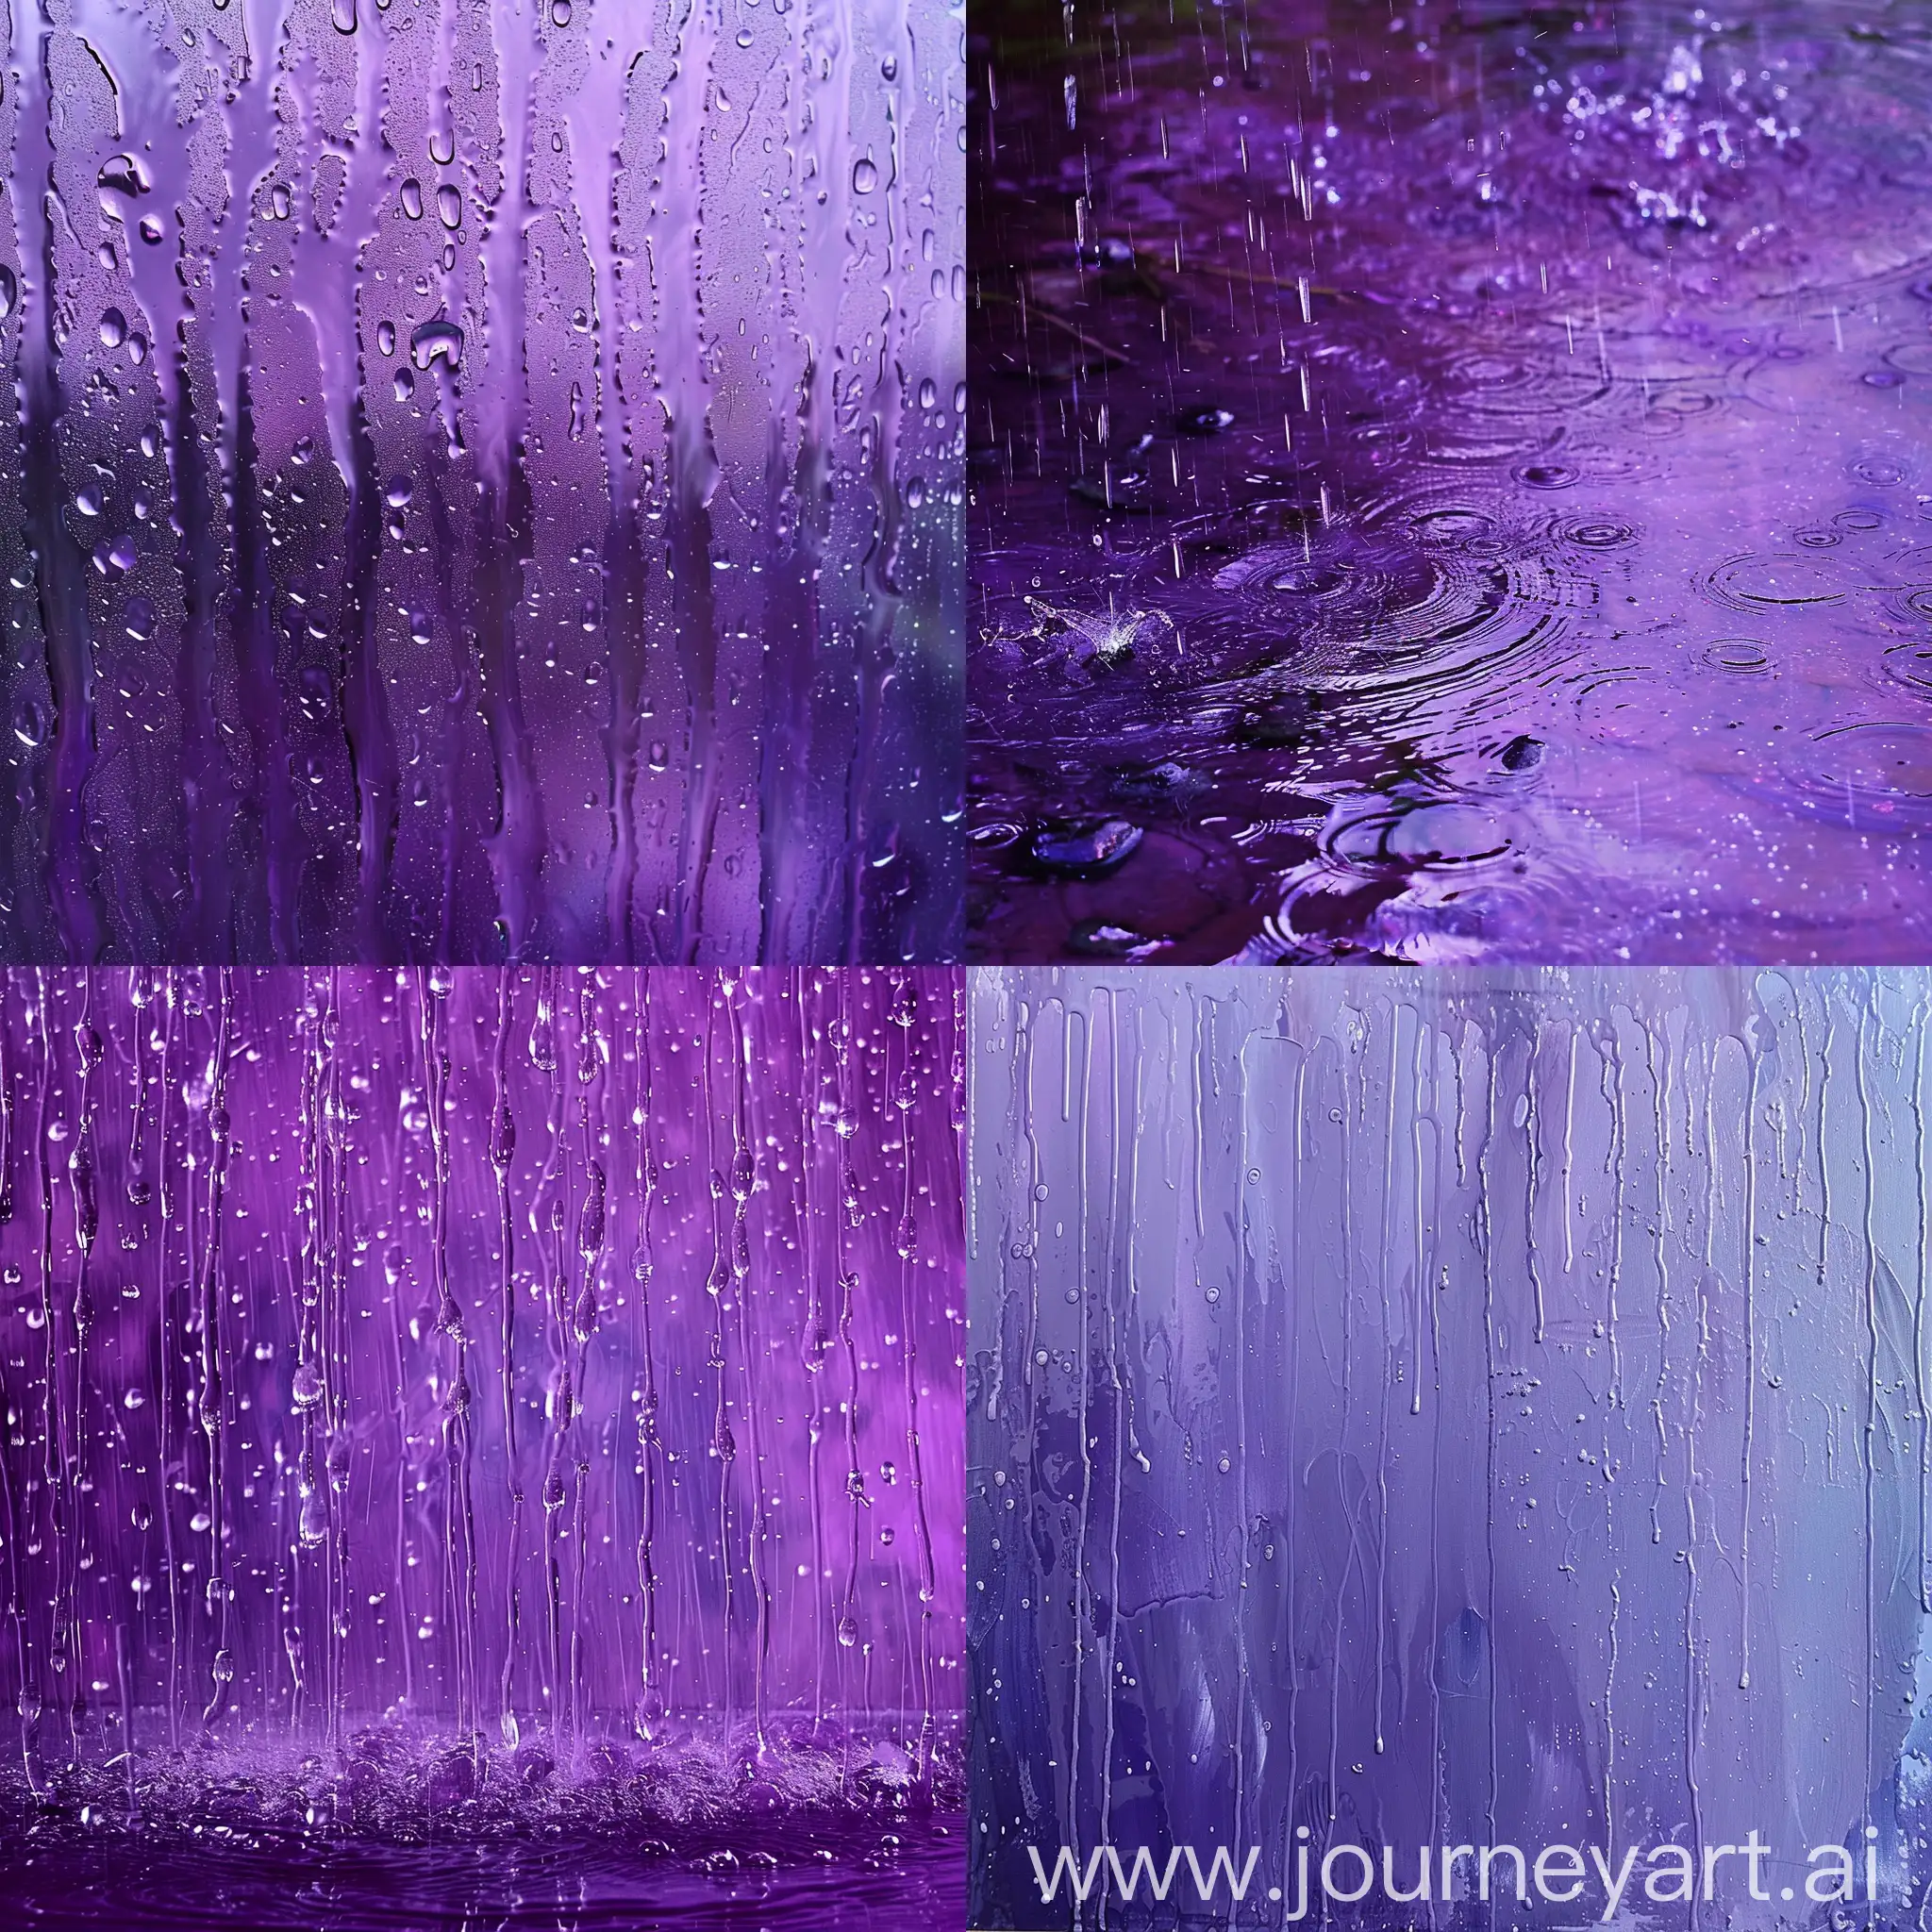 The Rain Formerly Known as Purple